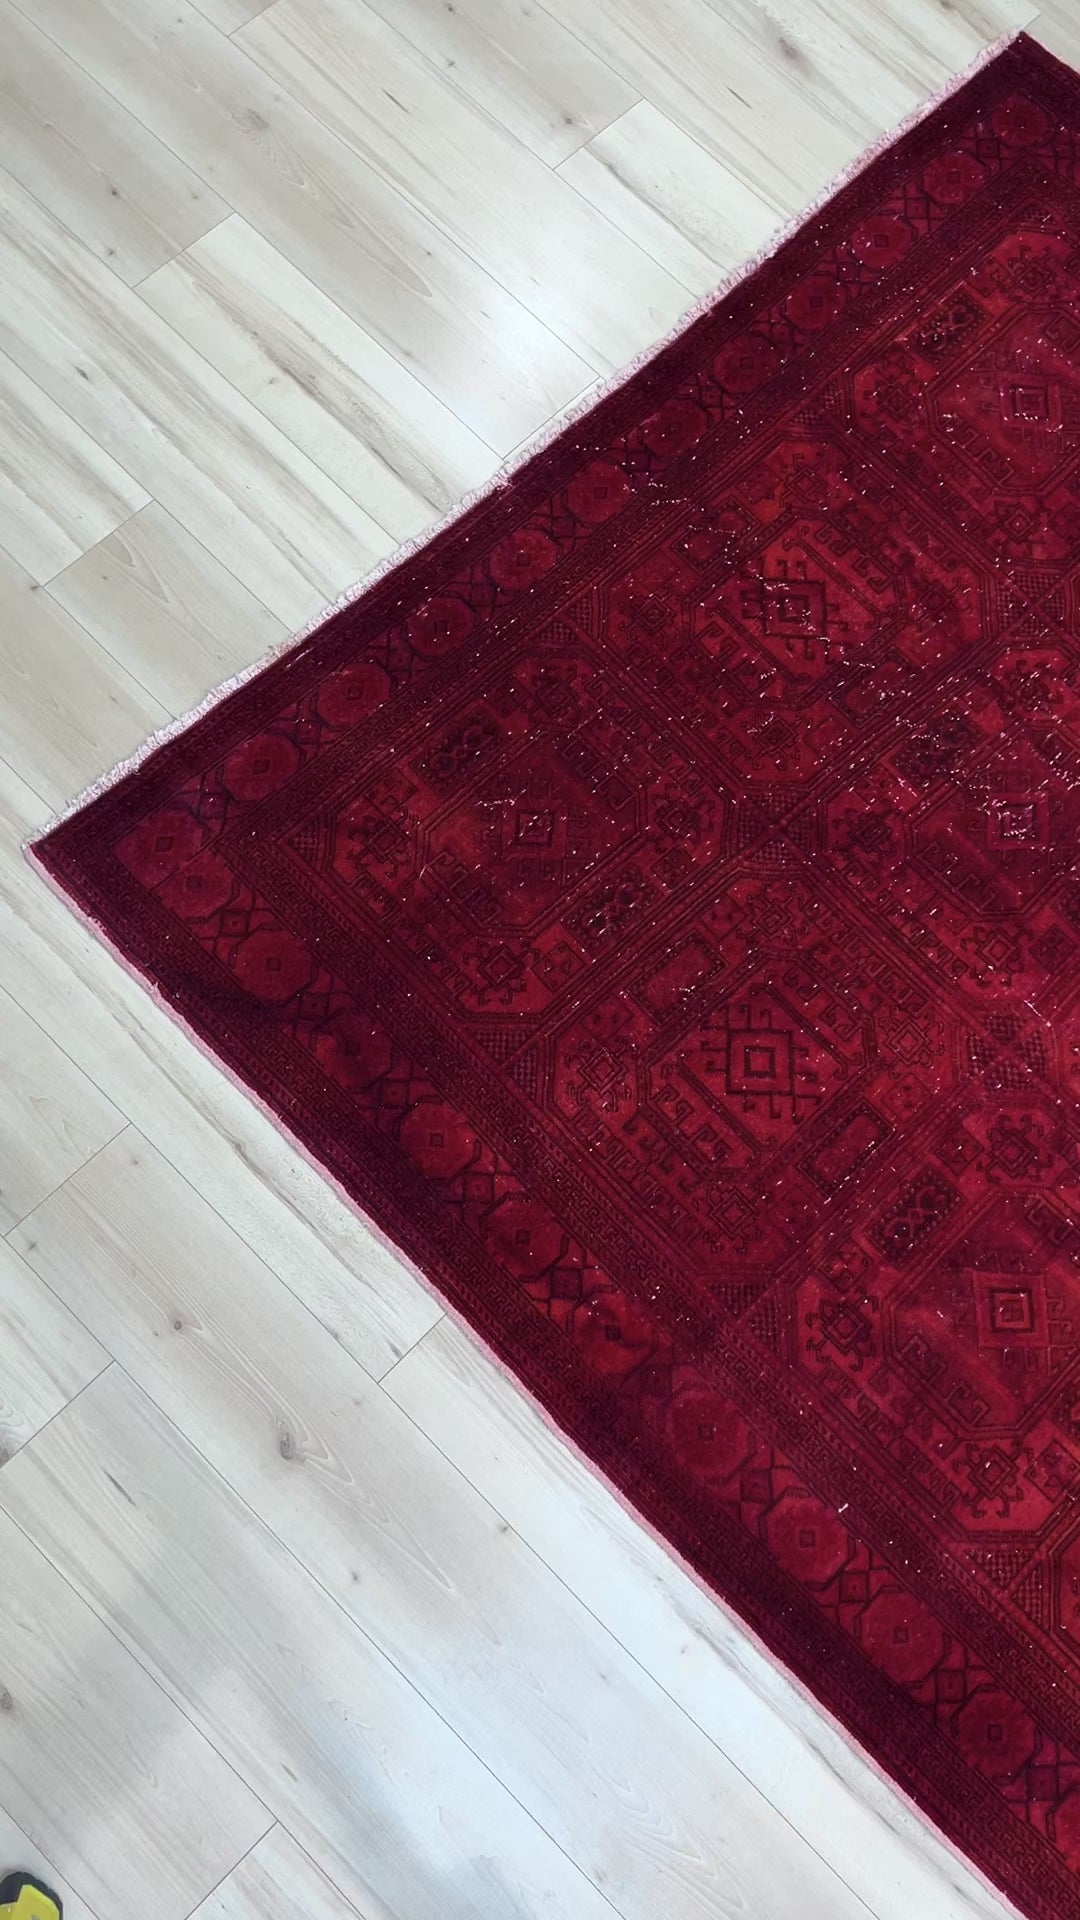 red overdyed turkish rug. Large minimalist area rug for living rom, bedroom, dining, office. Buy oriental rug store San Mateo CA, Mid-peninsula, San Francisco Bay Area. But rugs online free shipping to USA and Canada.